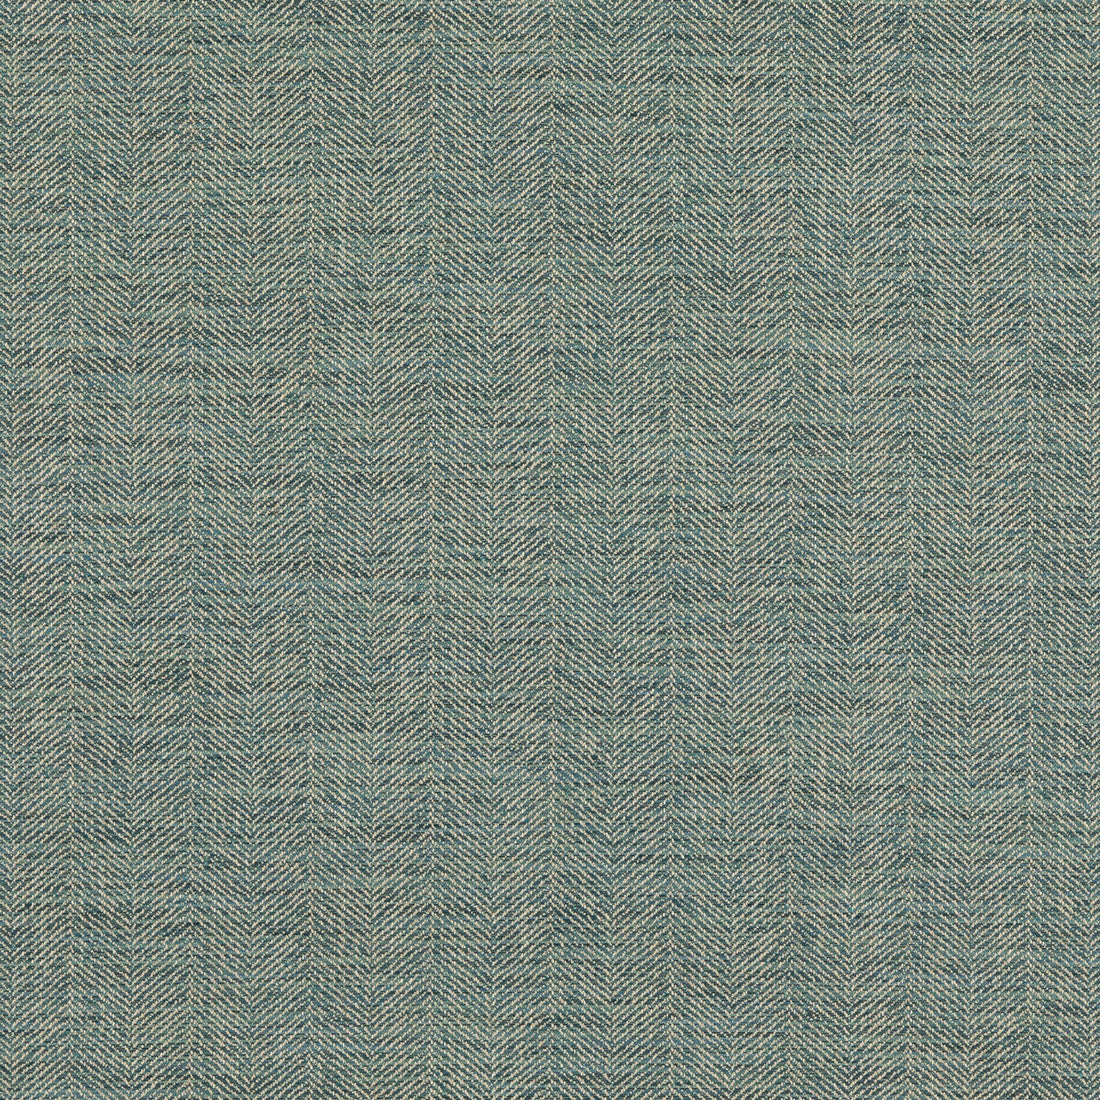 Grand Canyon fabric in teal color - pattern BF10878.615.0 - by G P &amp; J Baker in the Essential Colours II collection